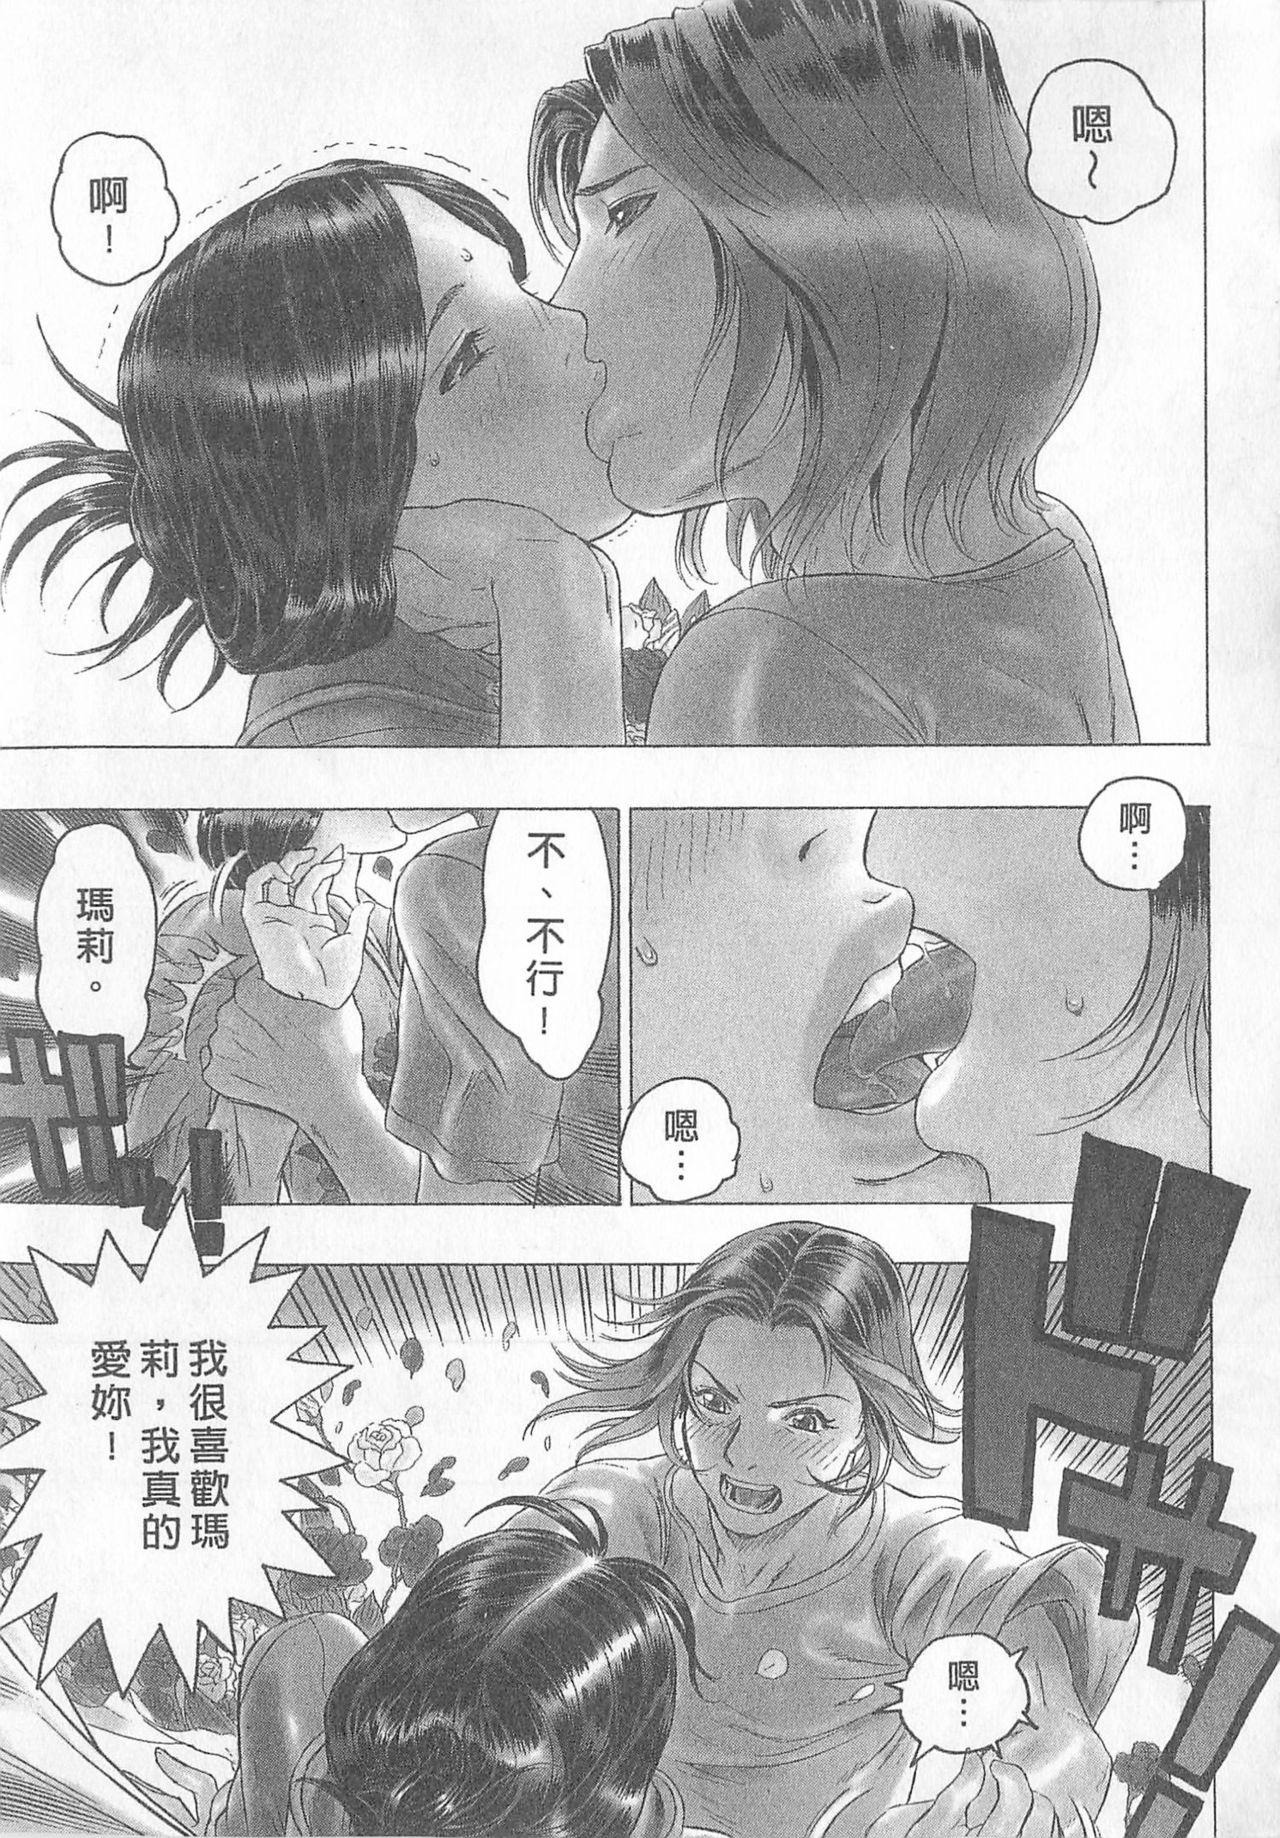 Party 10 years love vol.2 Asses - Page 153